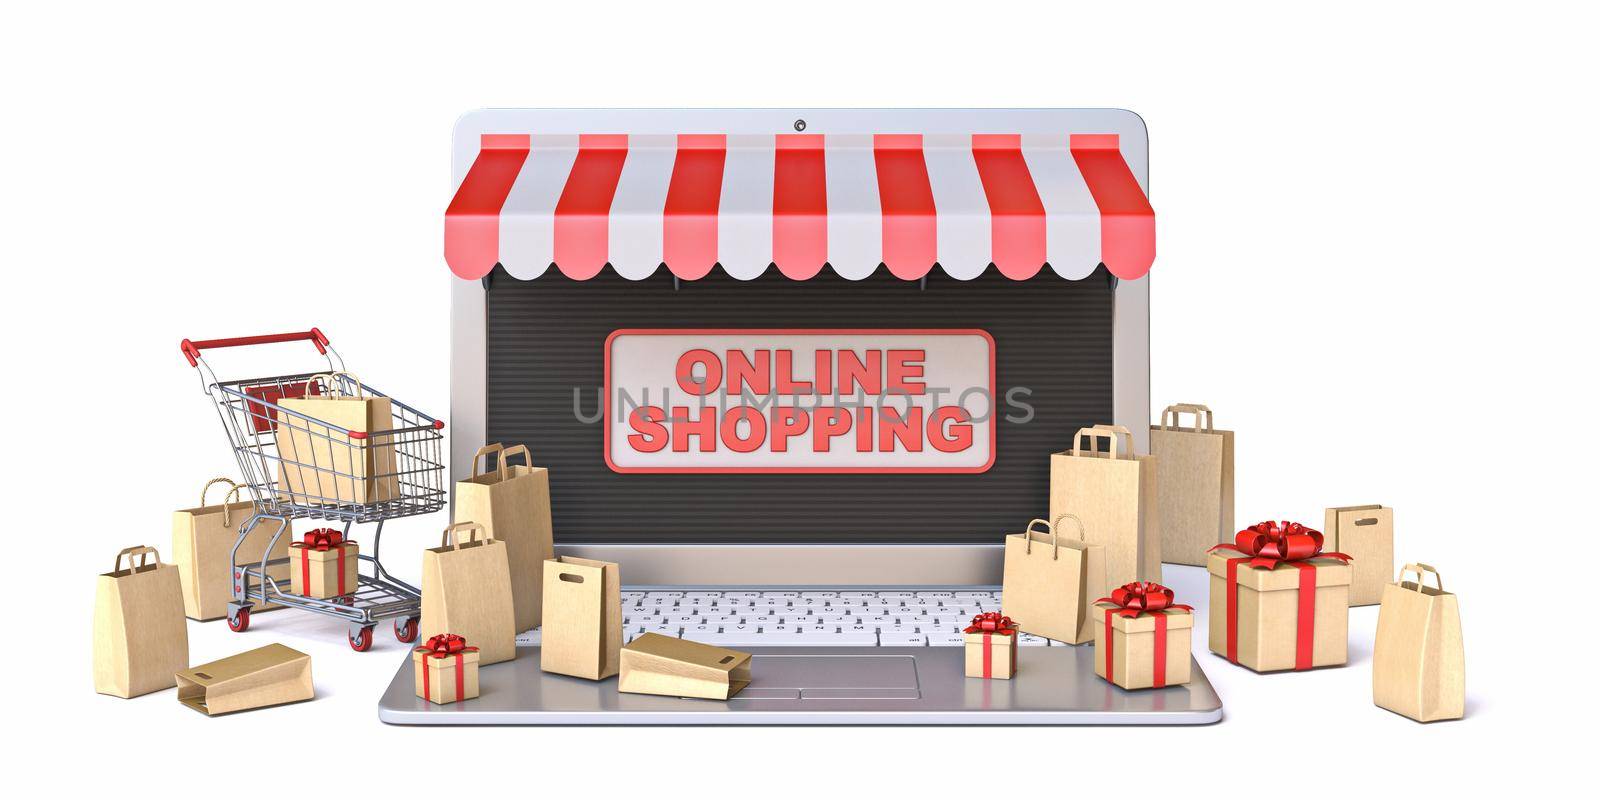 Shopping cart, bags and gift boxes on laptop Online shopping concept 3D rendering illustration isolated on white background